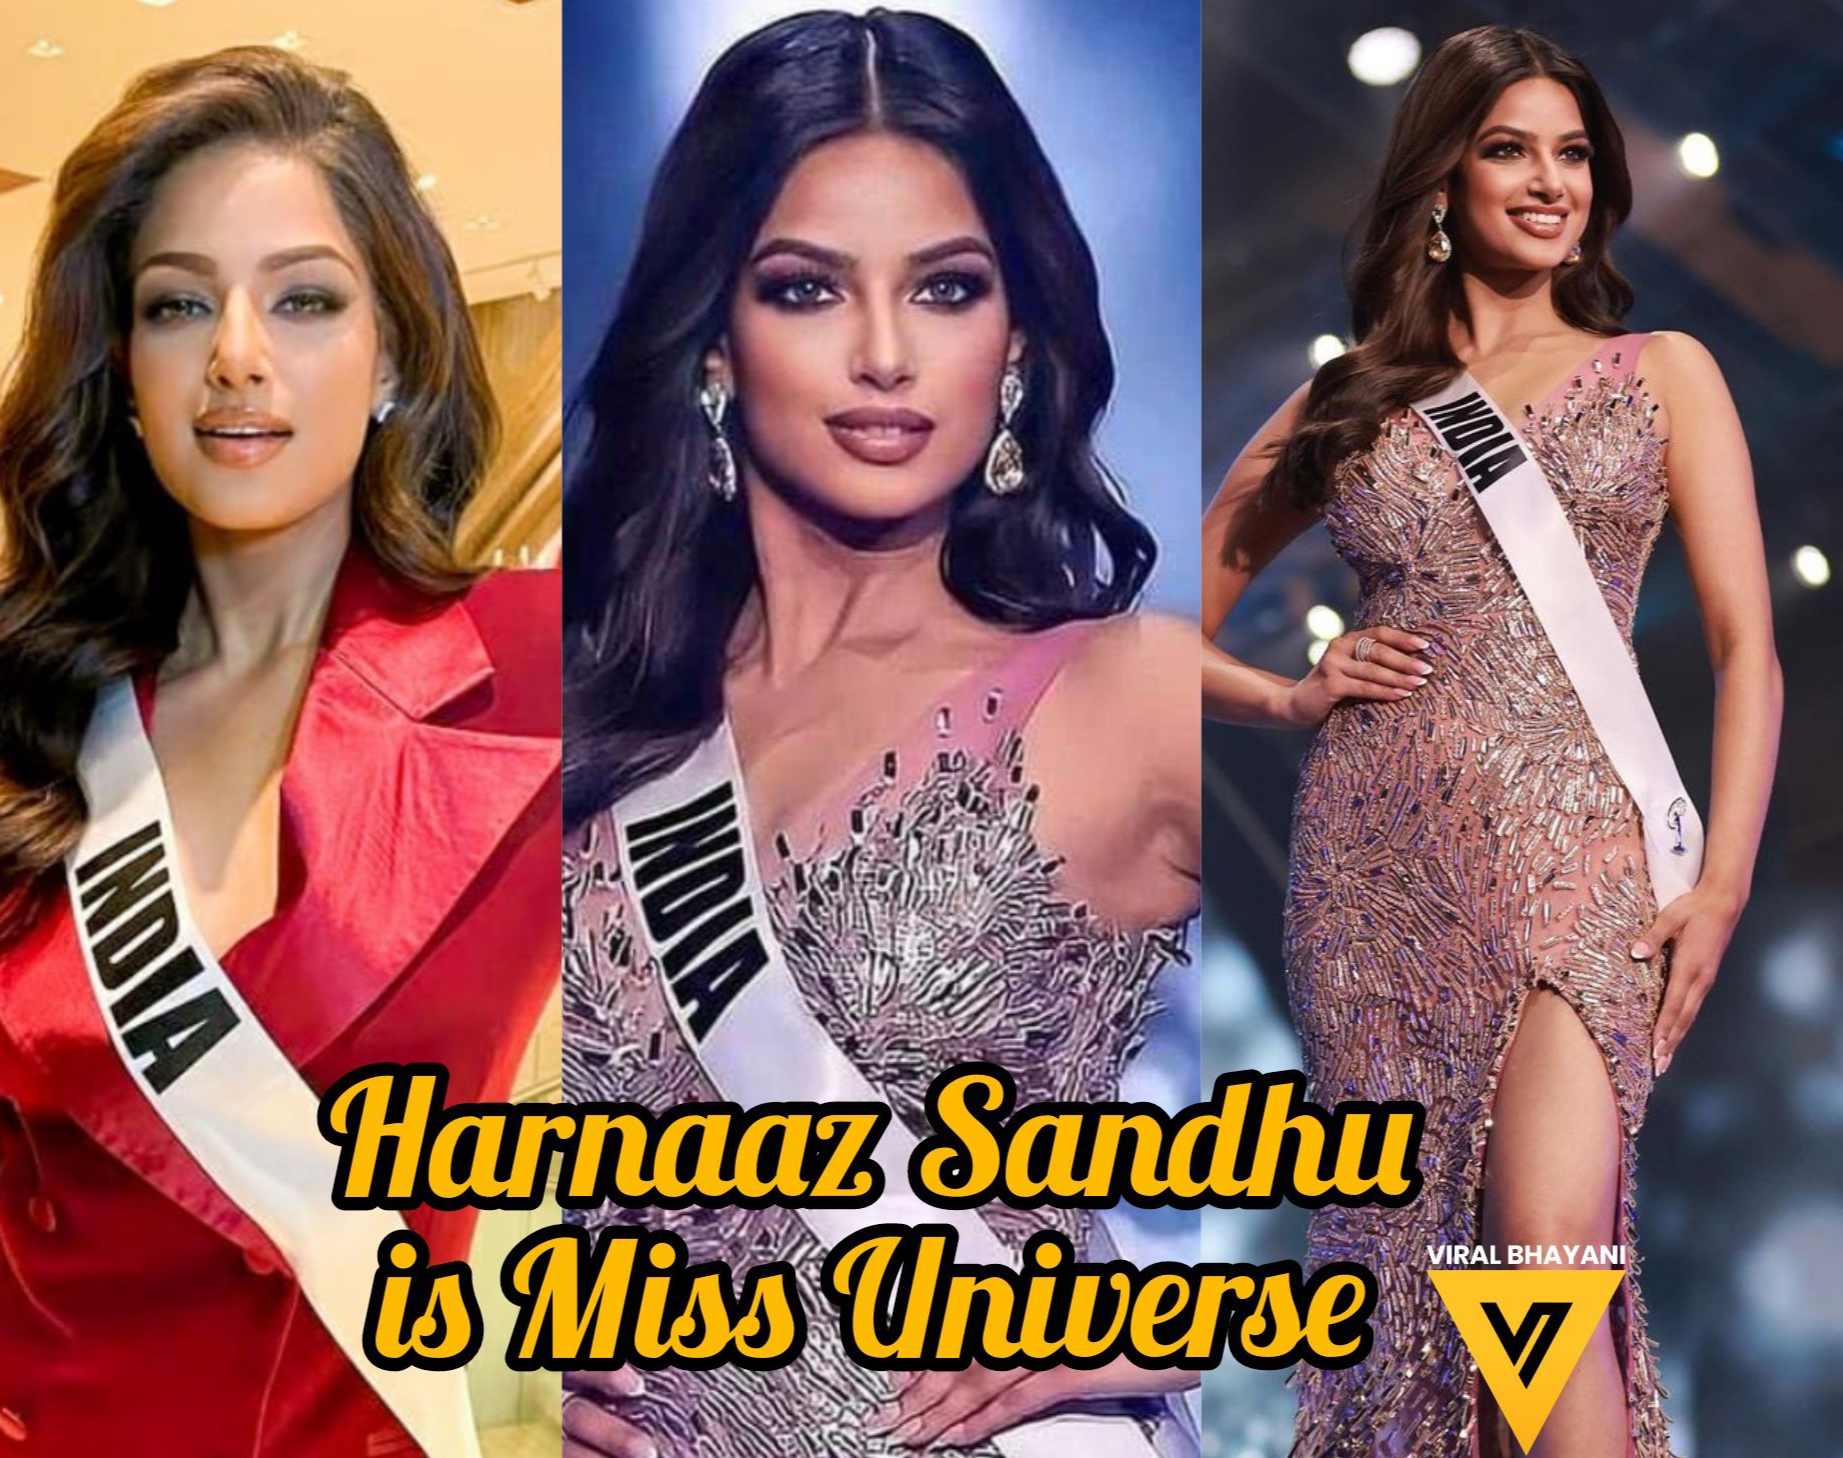 Harnaz Sindhu After 21 years, the Indian woman won the title of Miss Universe.